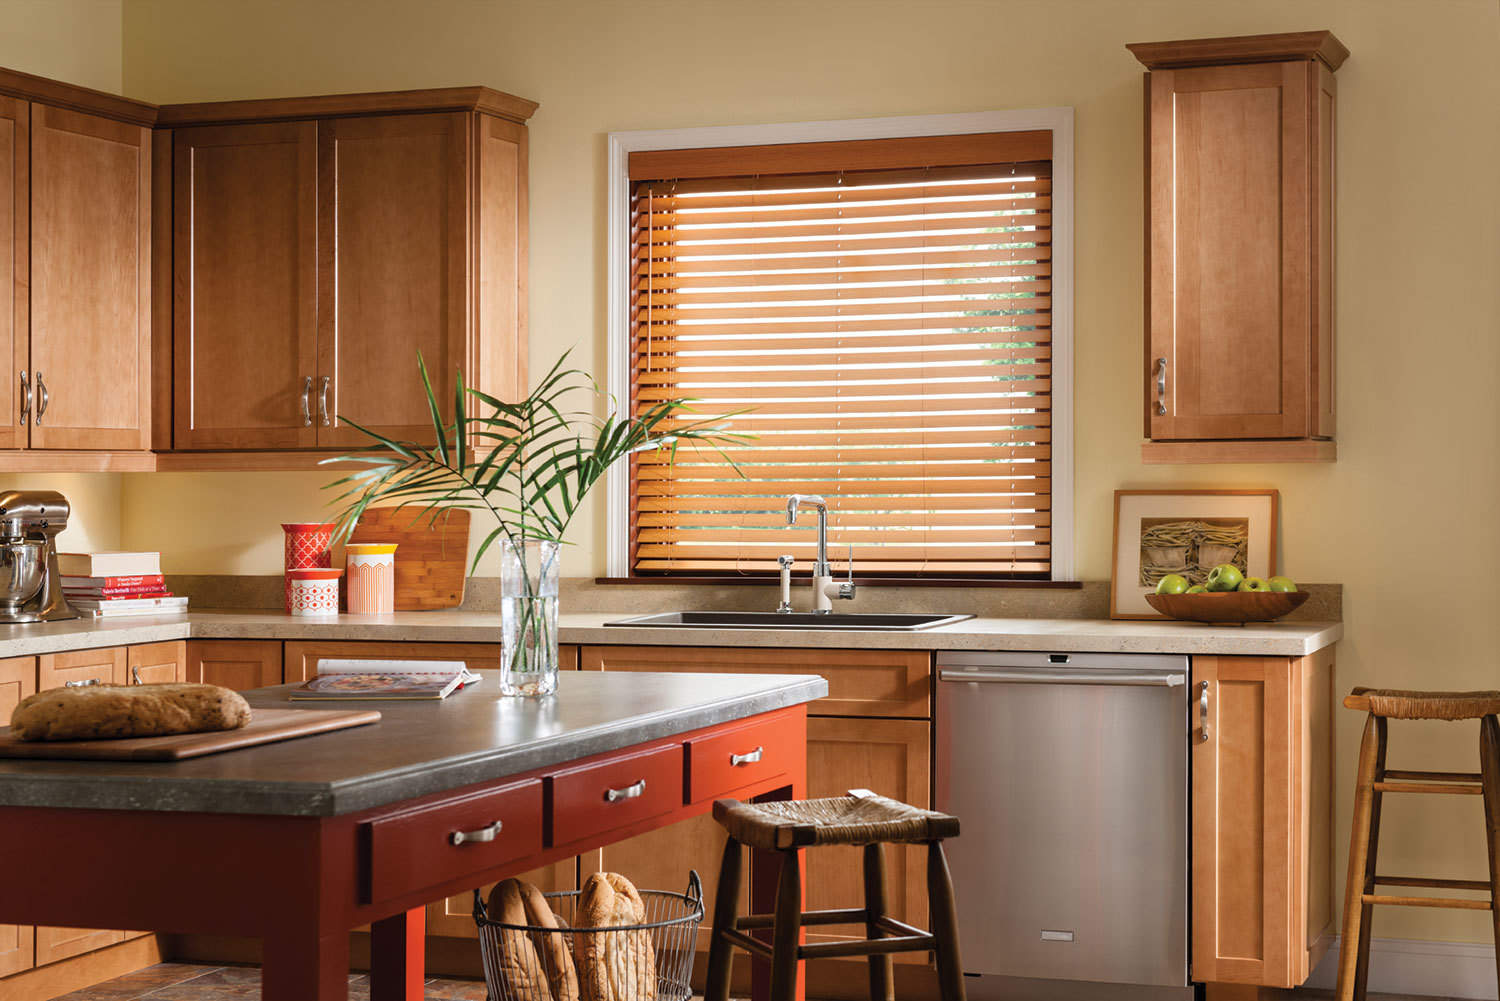 What Color Blinds Goes With Wood Trim